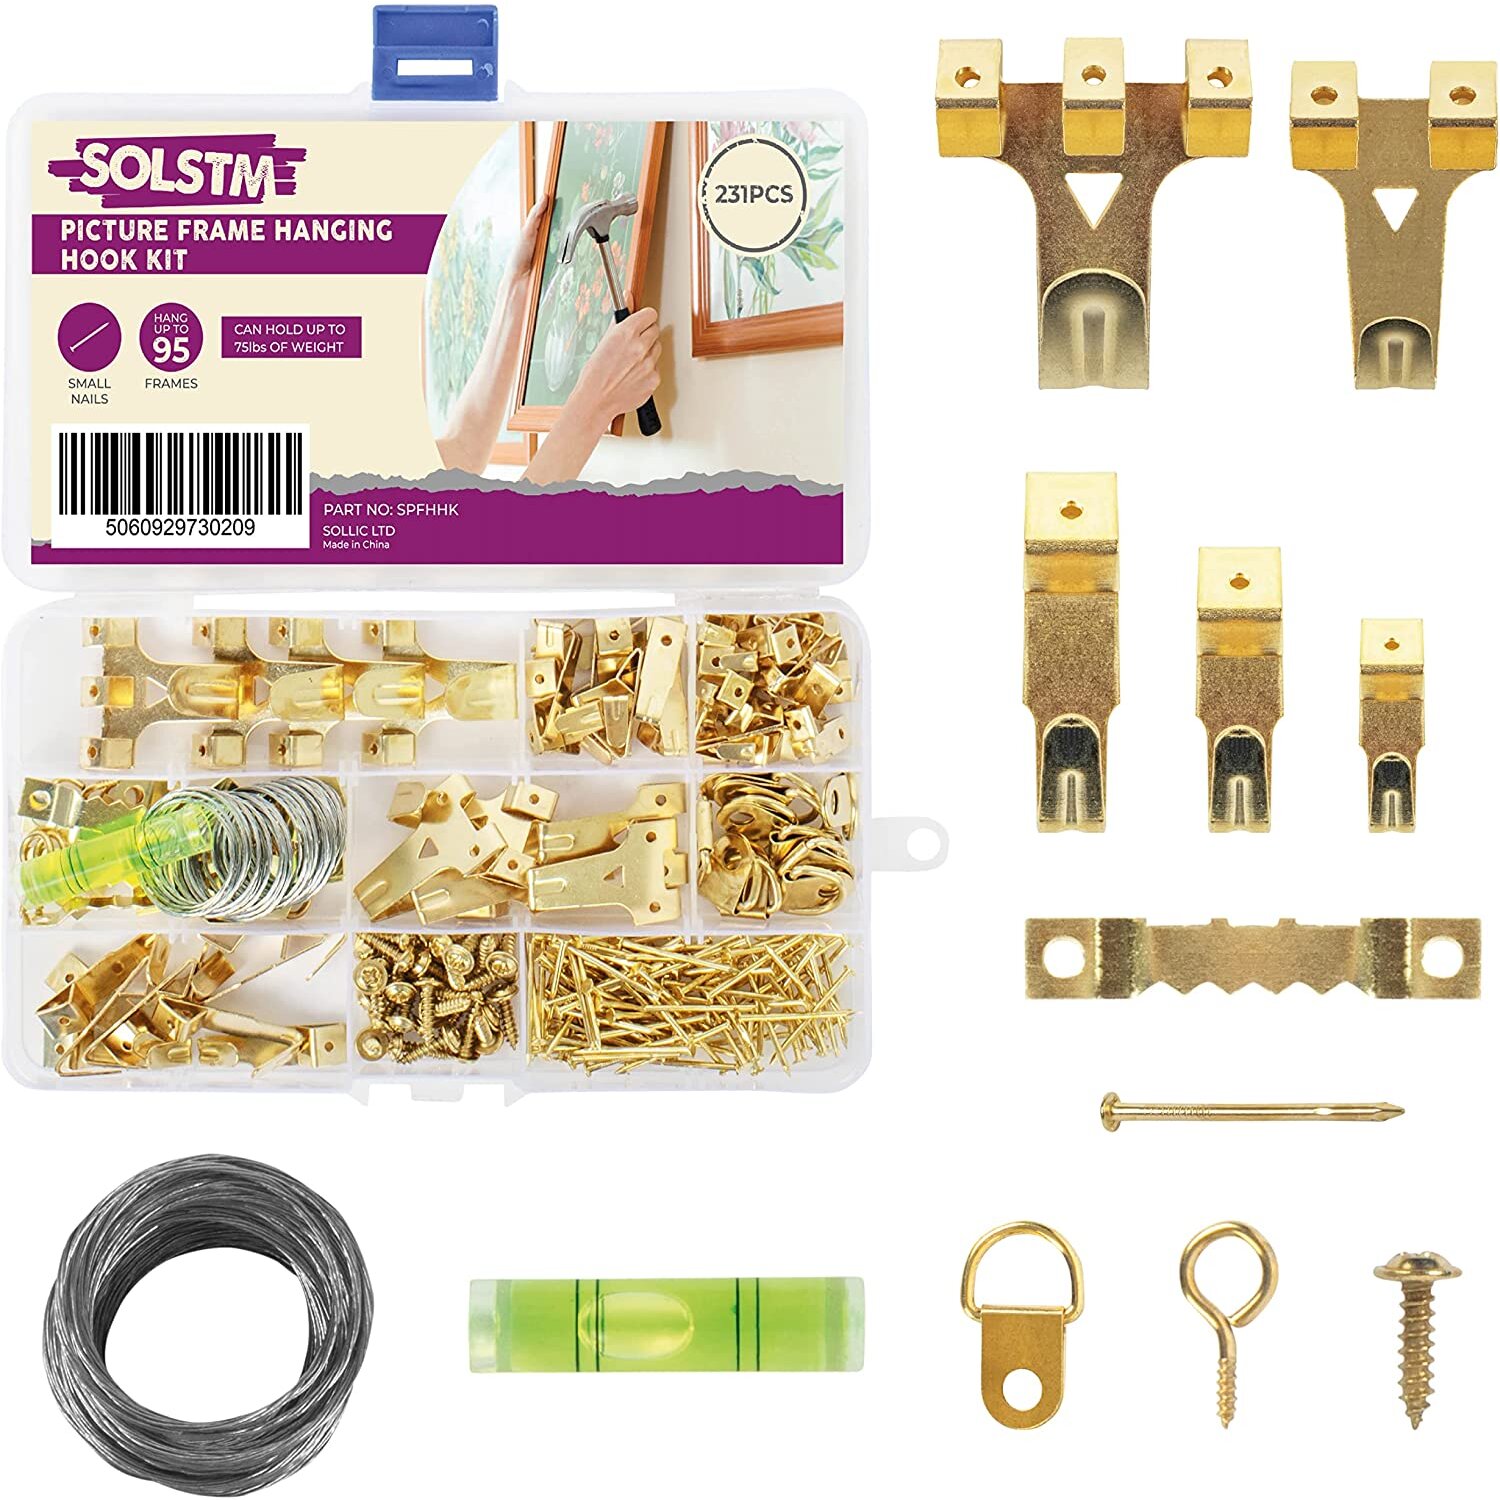 SOLSTM Picture Hanging Kit 231PCS - Heavy Duty Picture Hanging Hooks, Mini Spirit Level, Picture Nails, Picture Hanging Wire,...